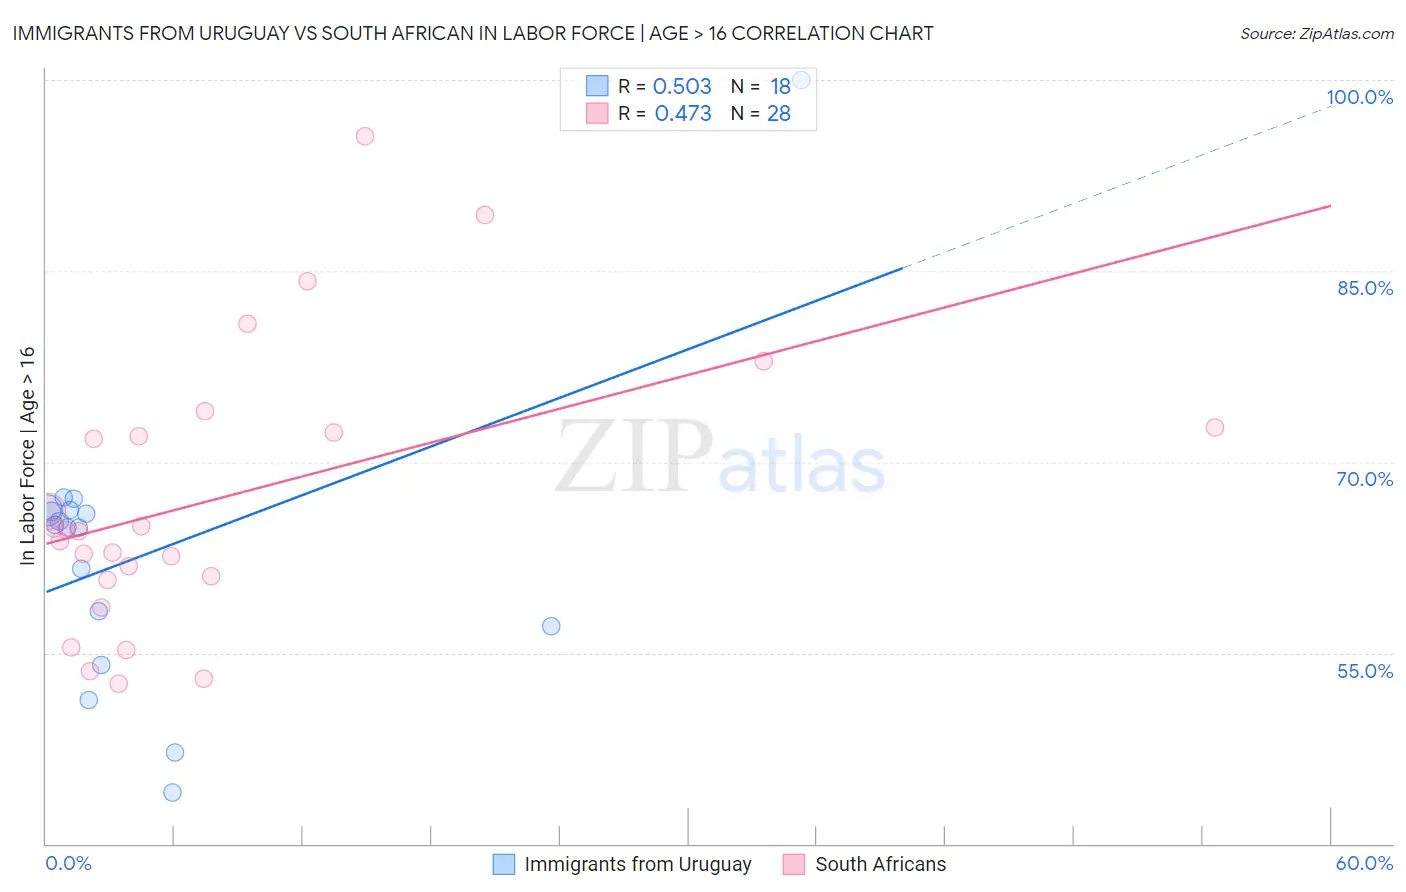 Immigrants from Uruguay vs South African In Labor Force | Age > 16